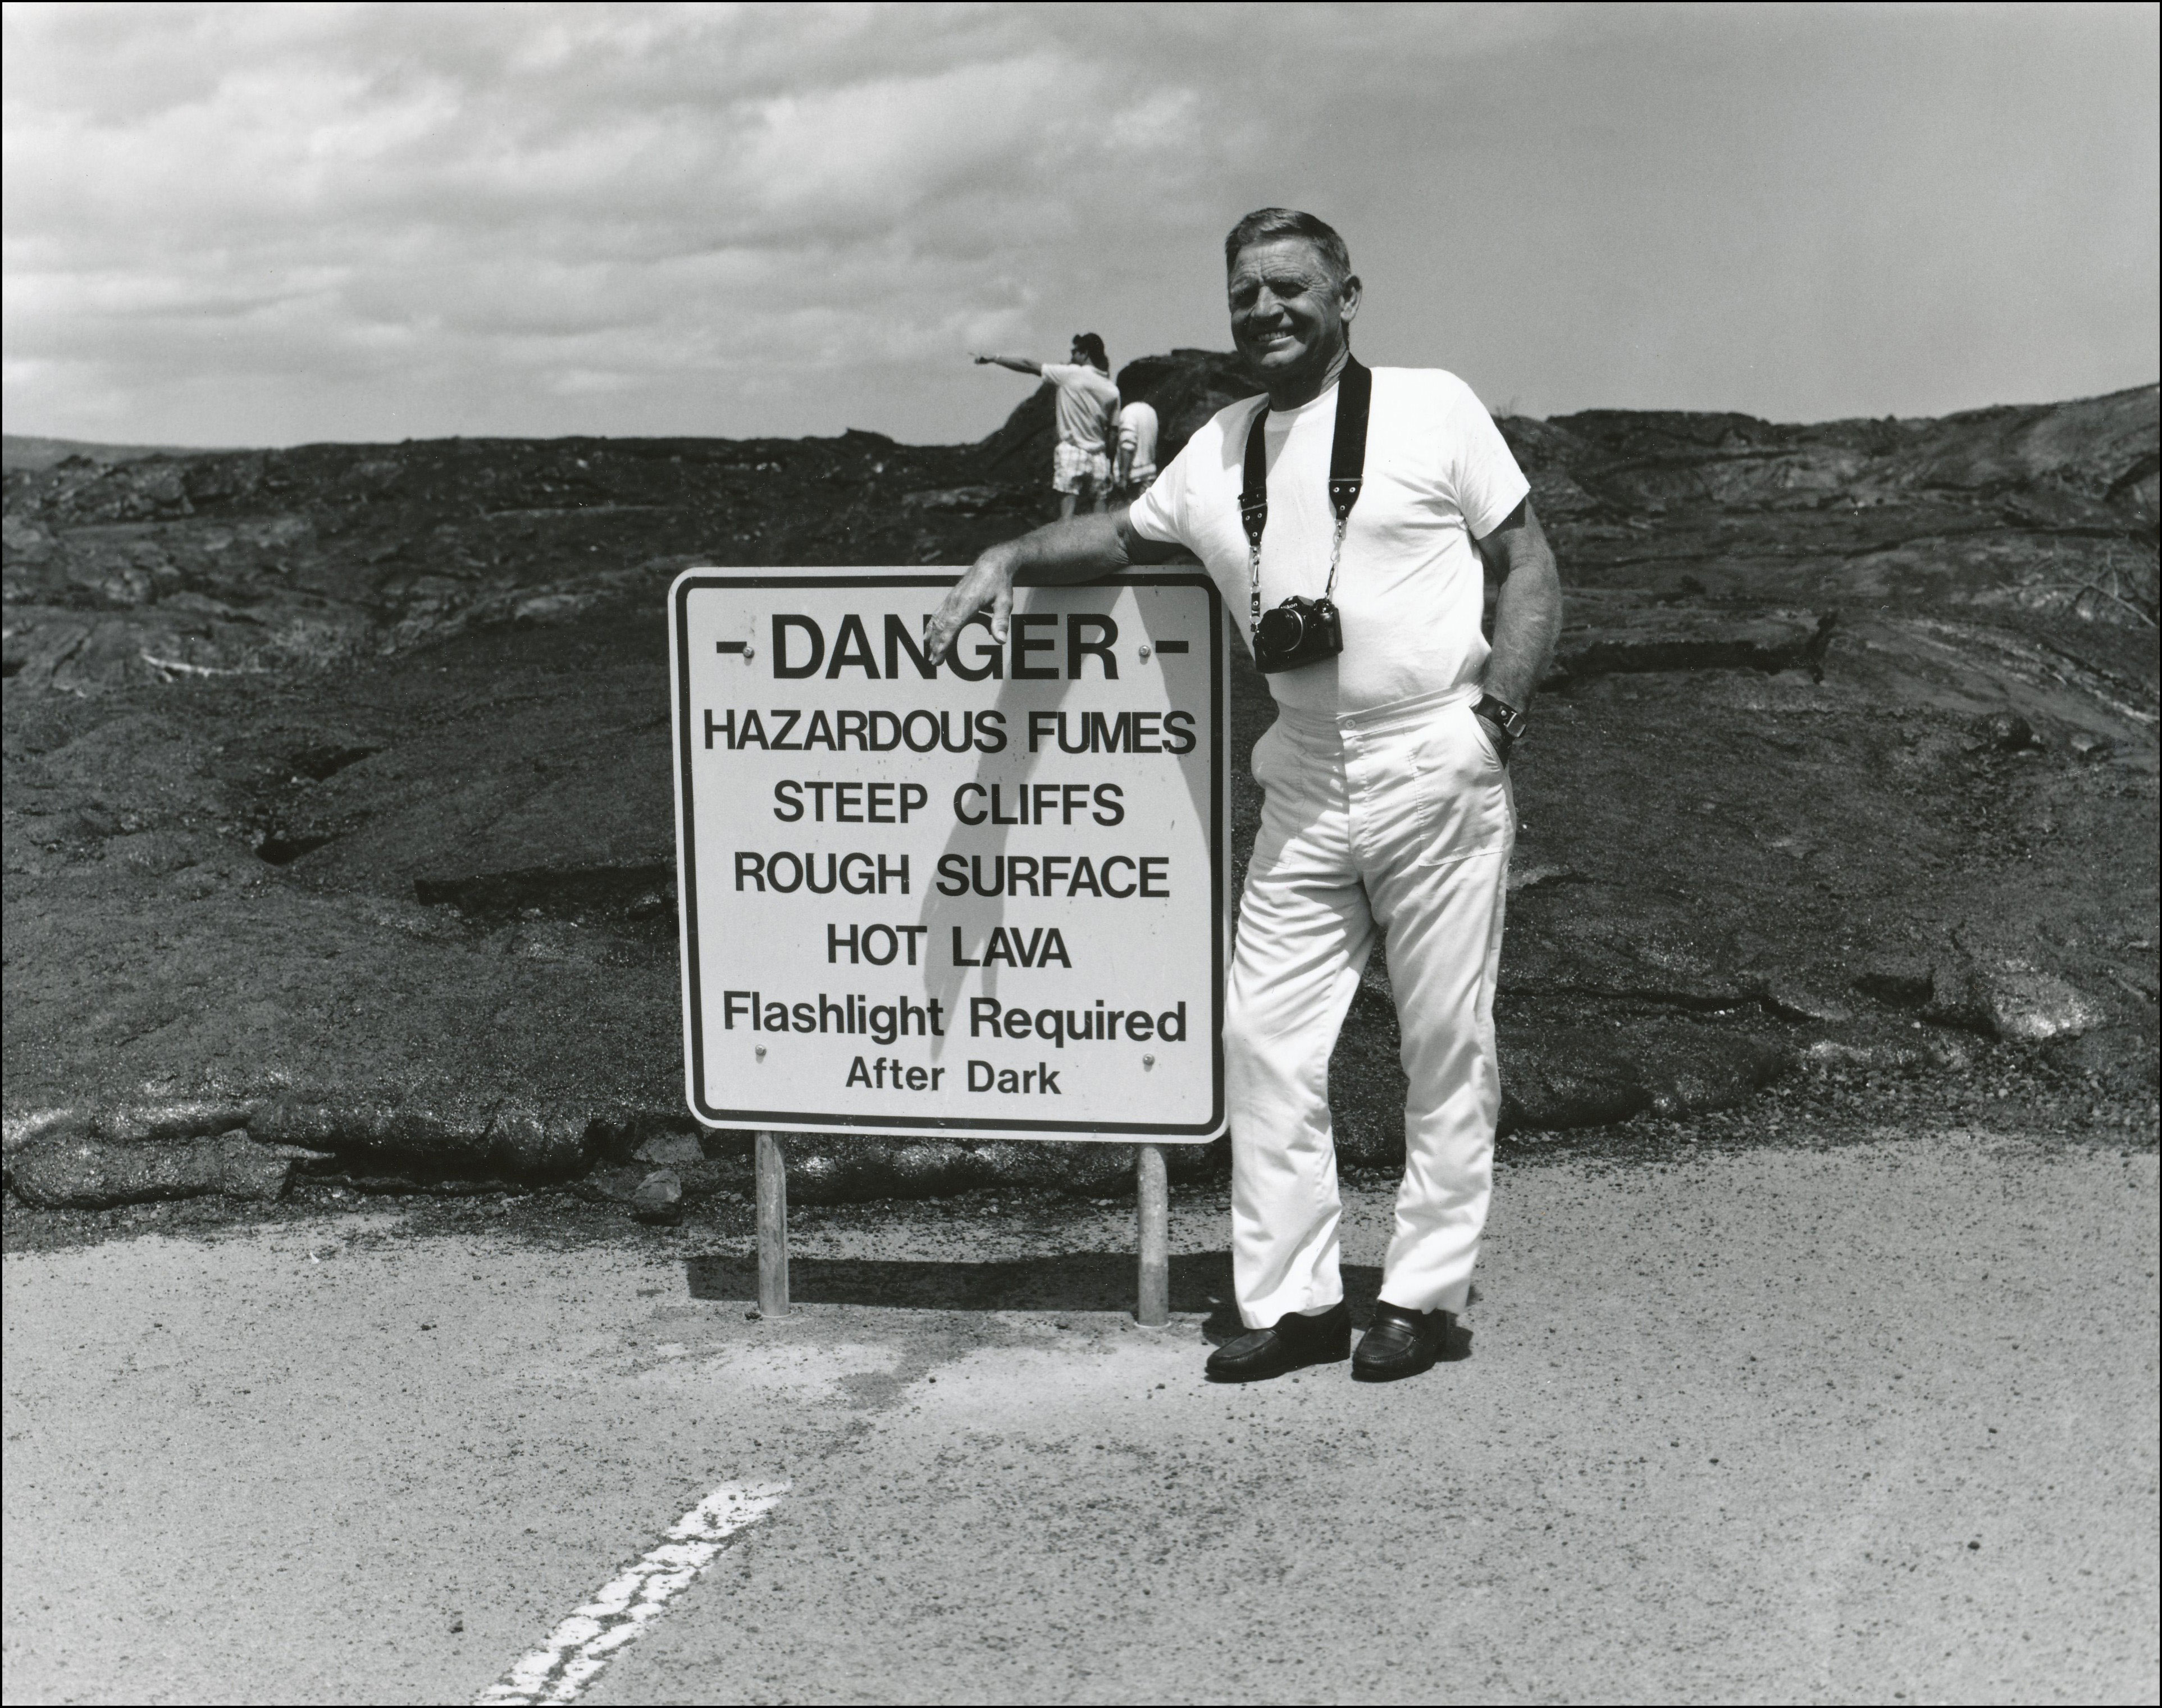 Tourist with camera around neck posing by a sign that says DANGER, hazardous fumes, steep cliffs, rough surface, hot lava, Flashlight required after dark. Old lava flows behind him.